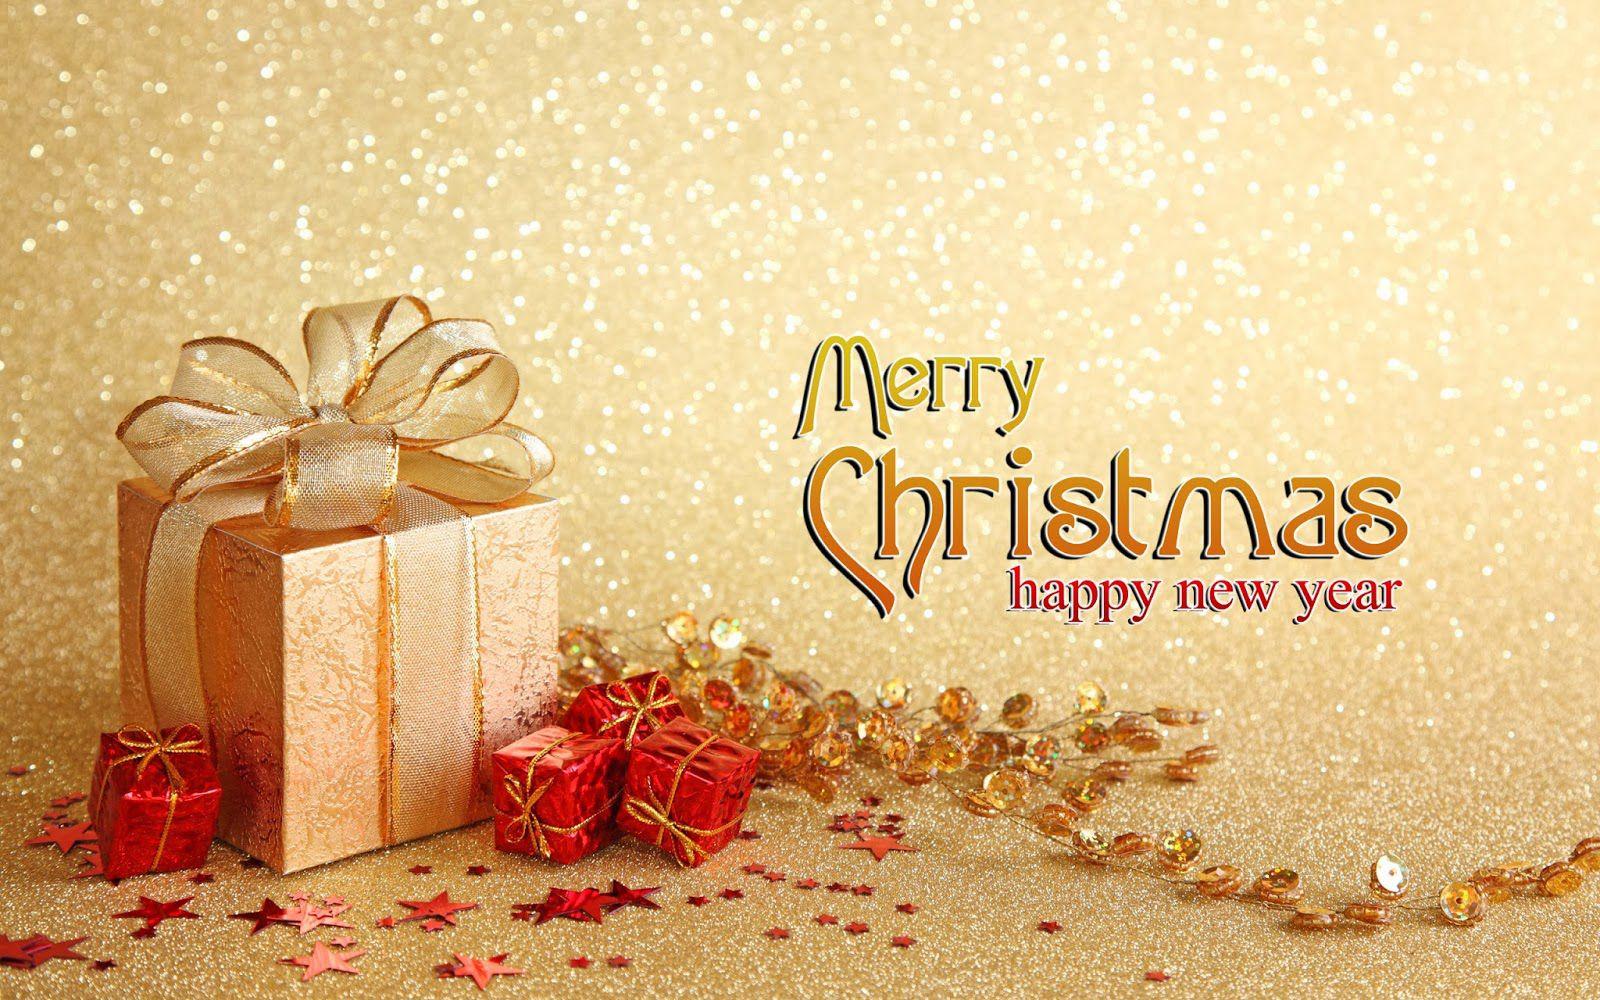 Merry Christmas Wishes, Greetings & Messages, Christmas Greetings